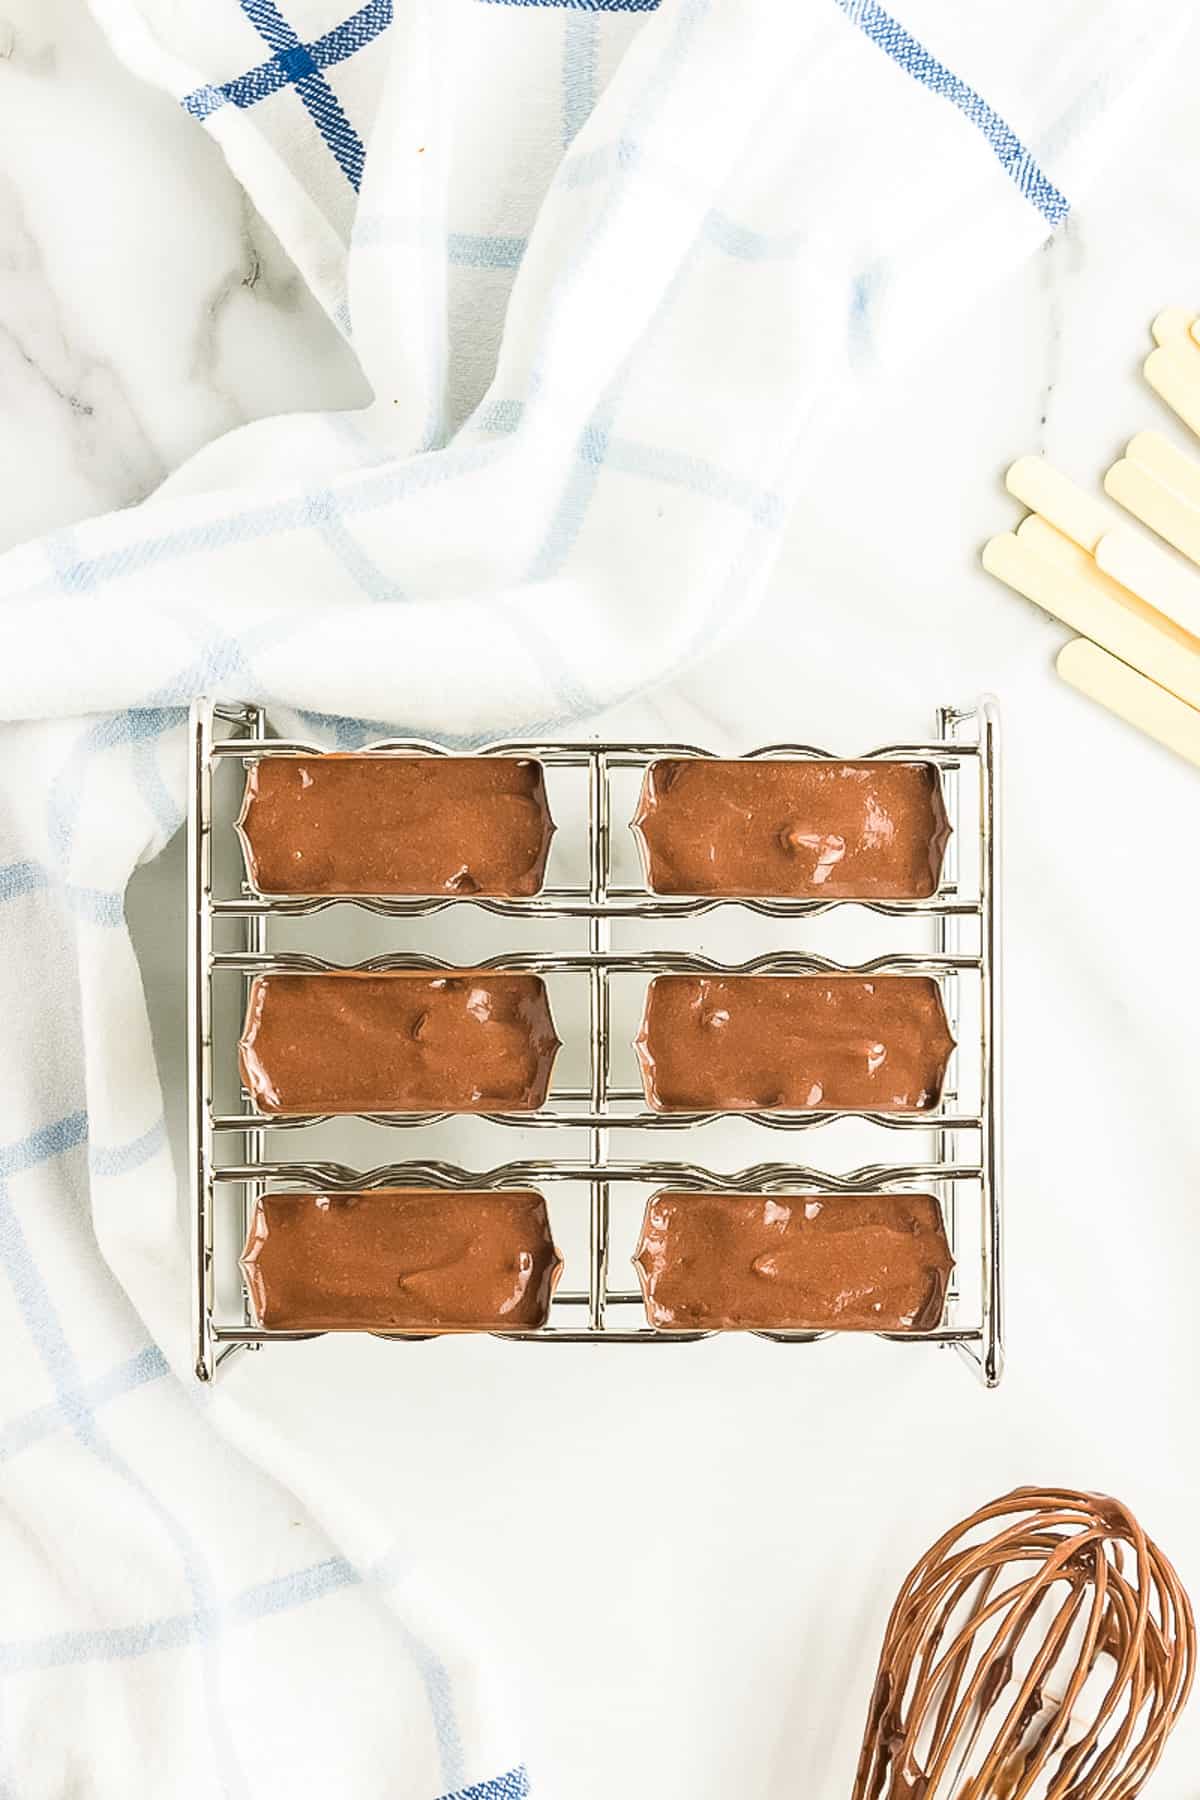 Pudding Displayed in the Popsicle Molds.